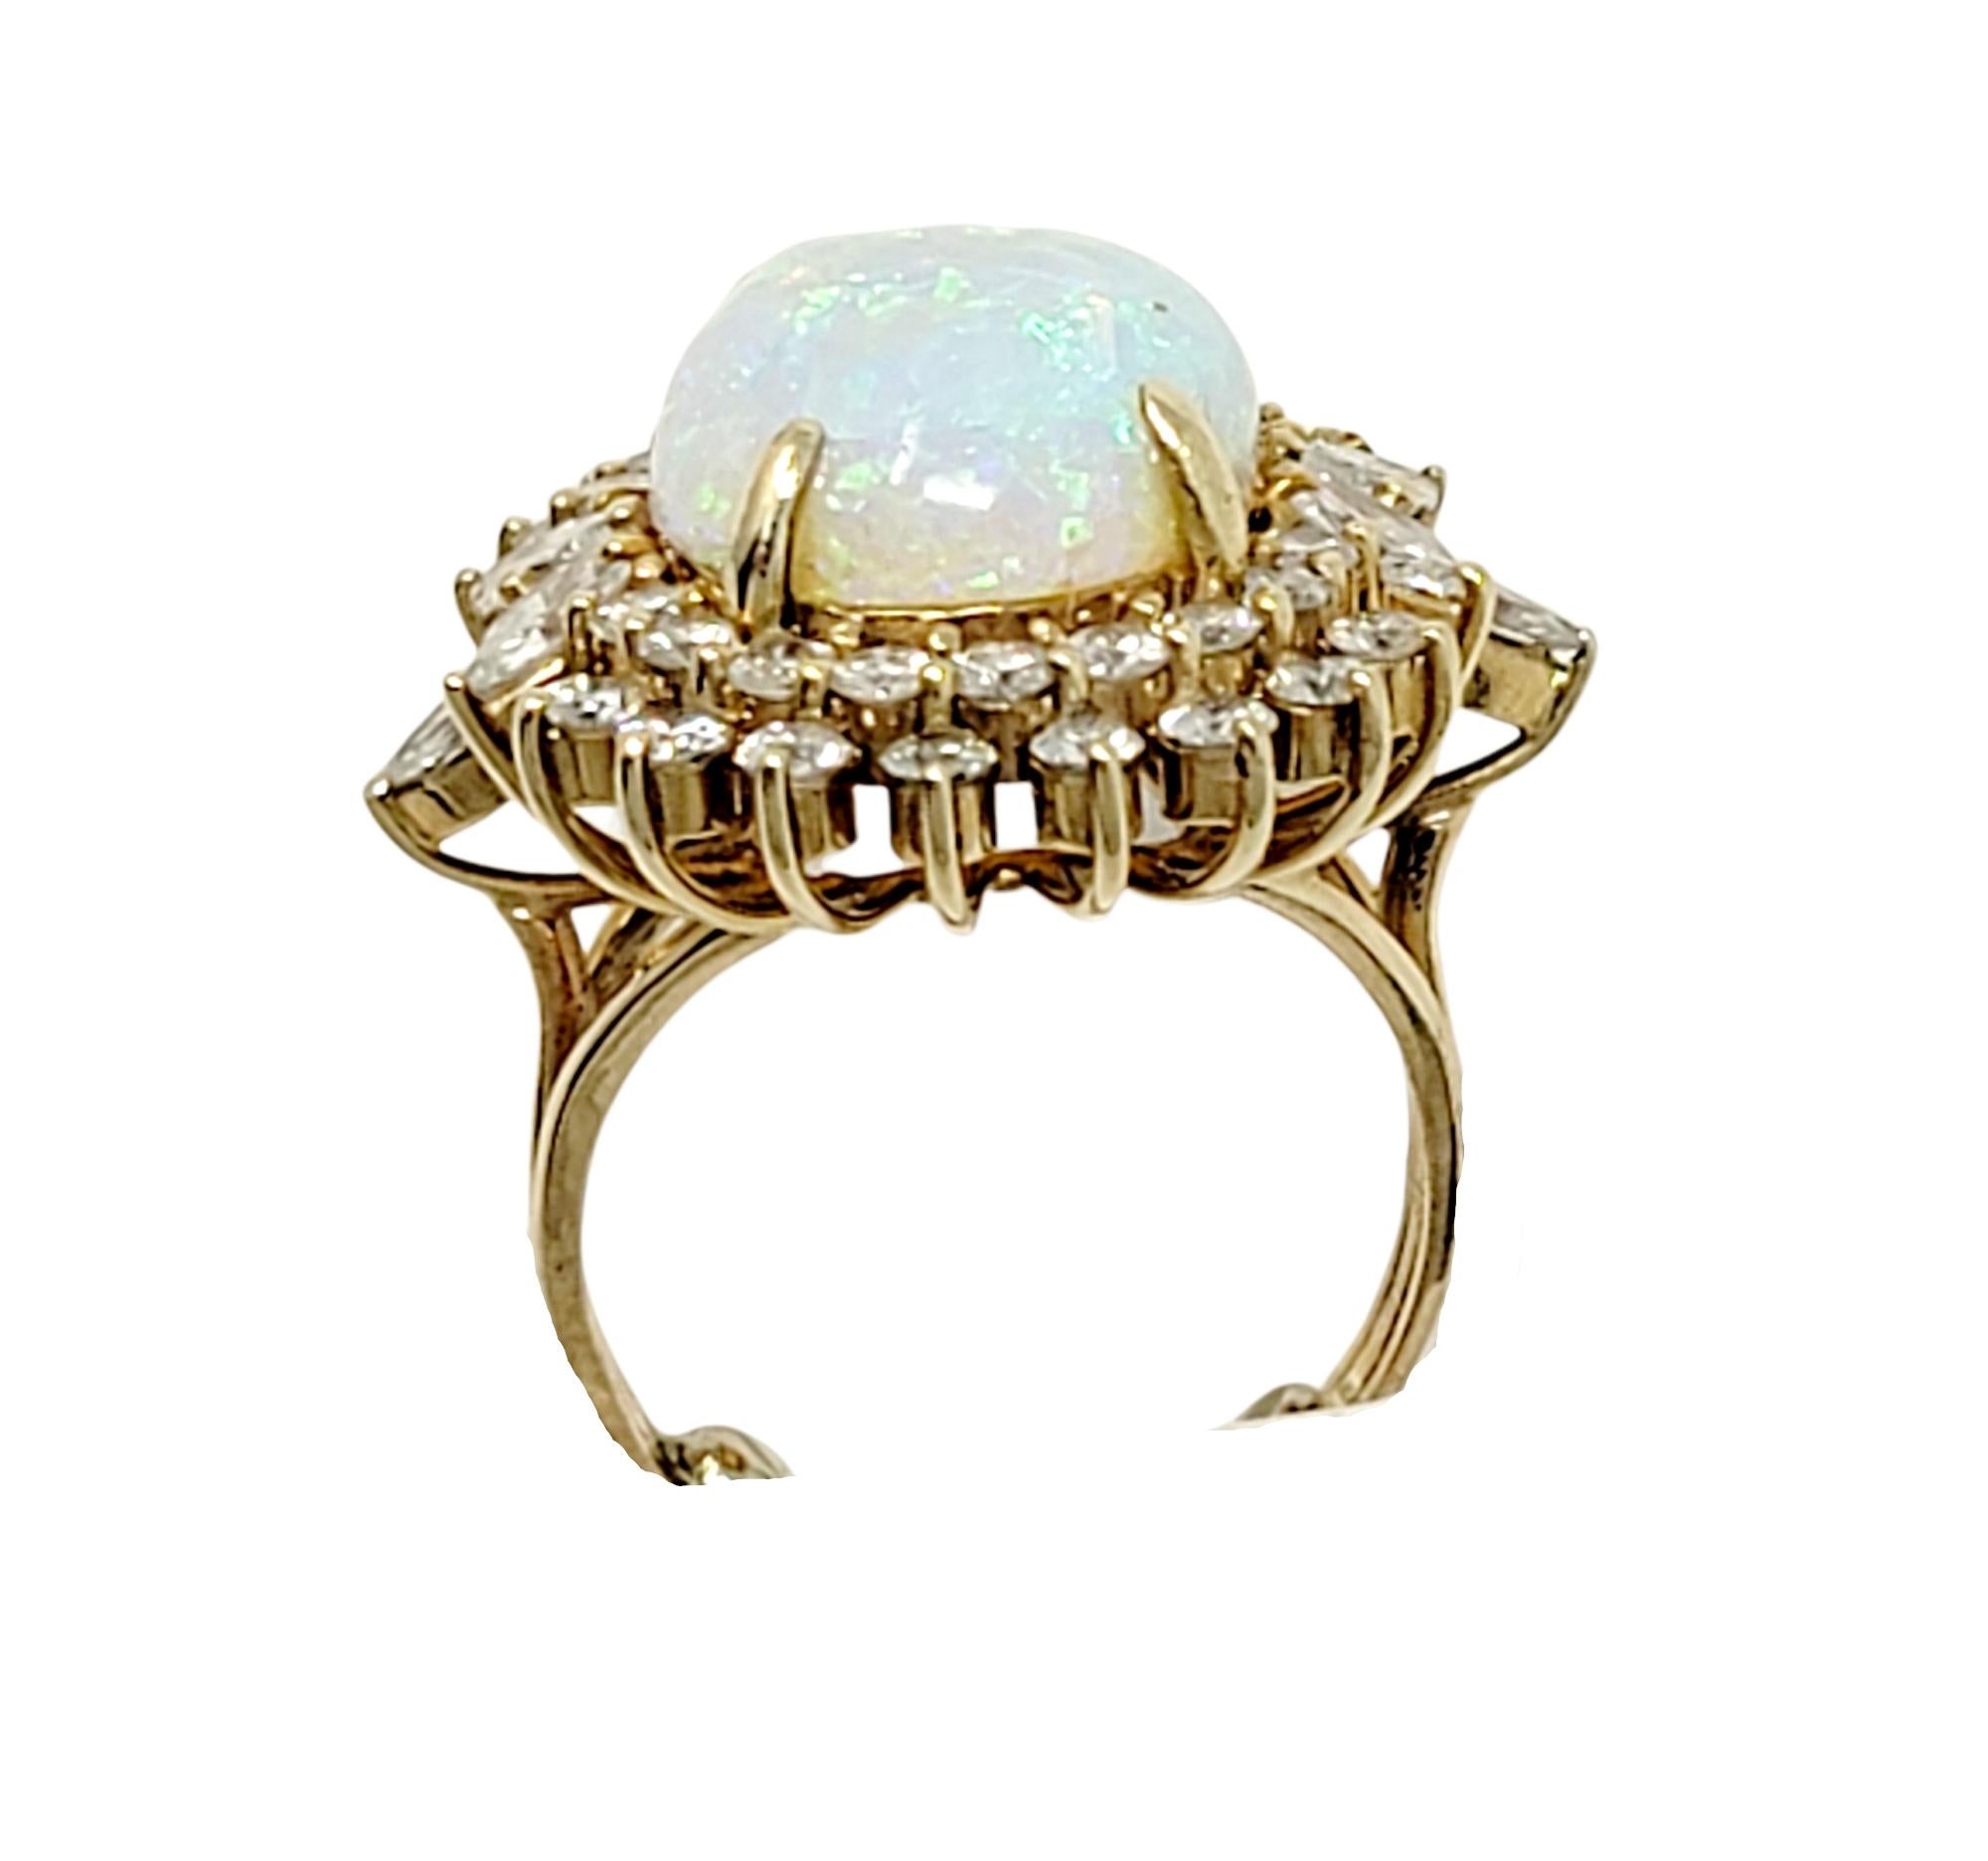 7.55 Carats Total Opal Cabochon and Diamond Halo Ring in 14 Karat Yellow Gold For Sale 1